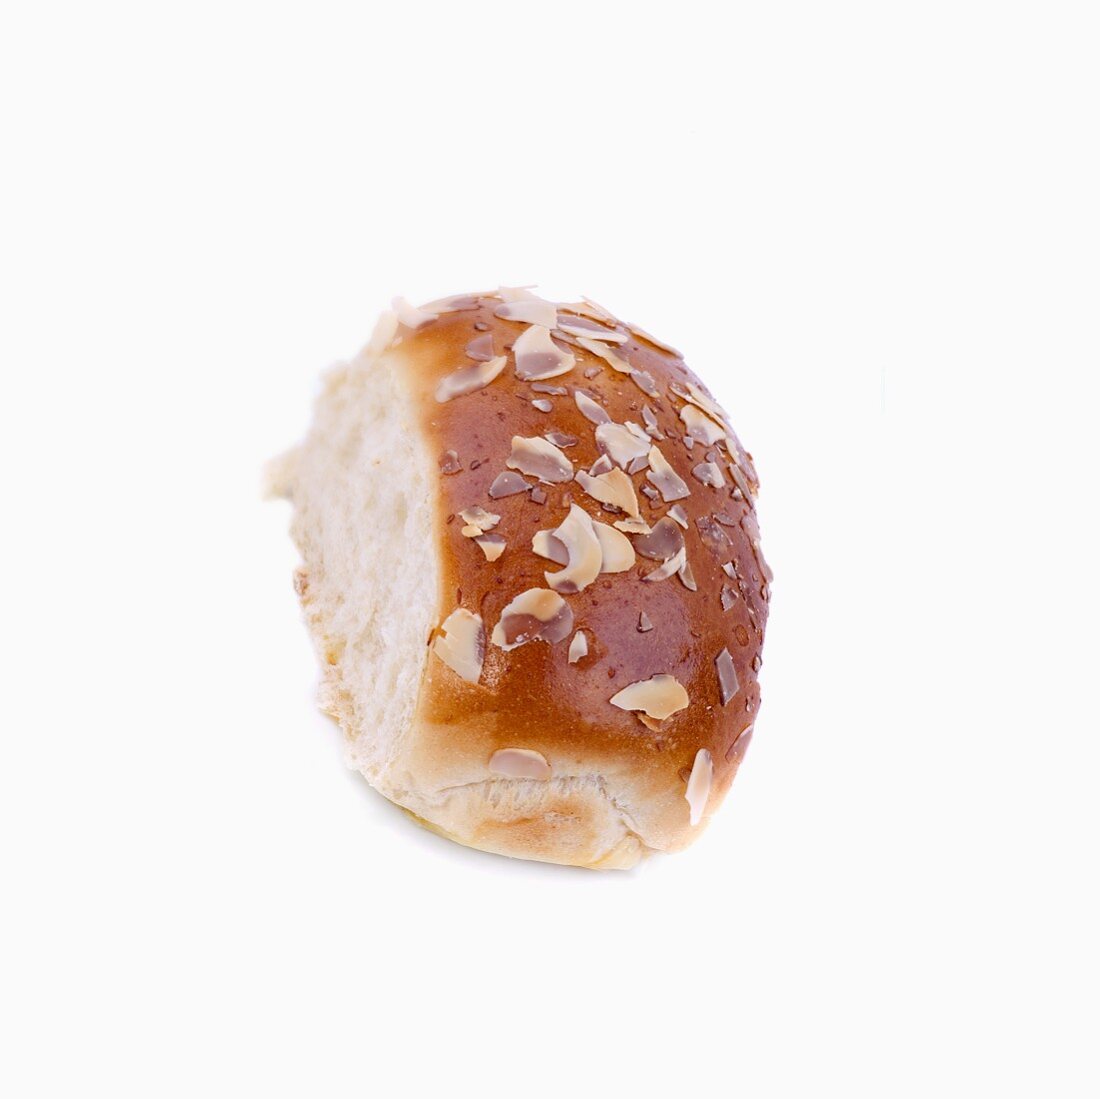 Yeast bun with flaked almonds